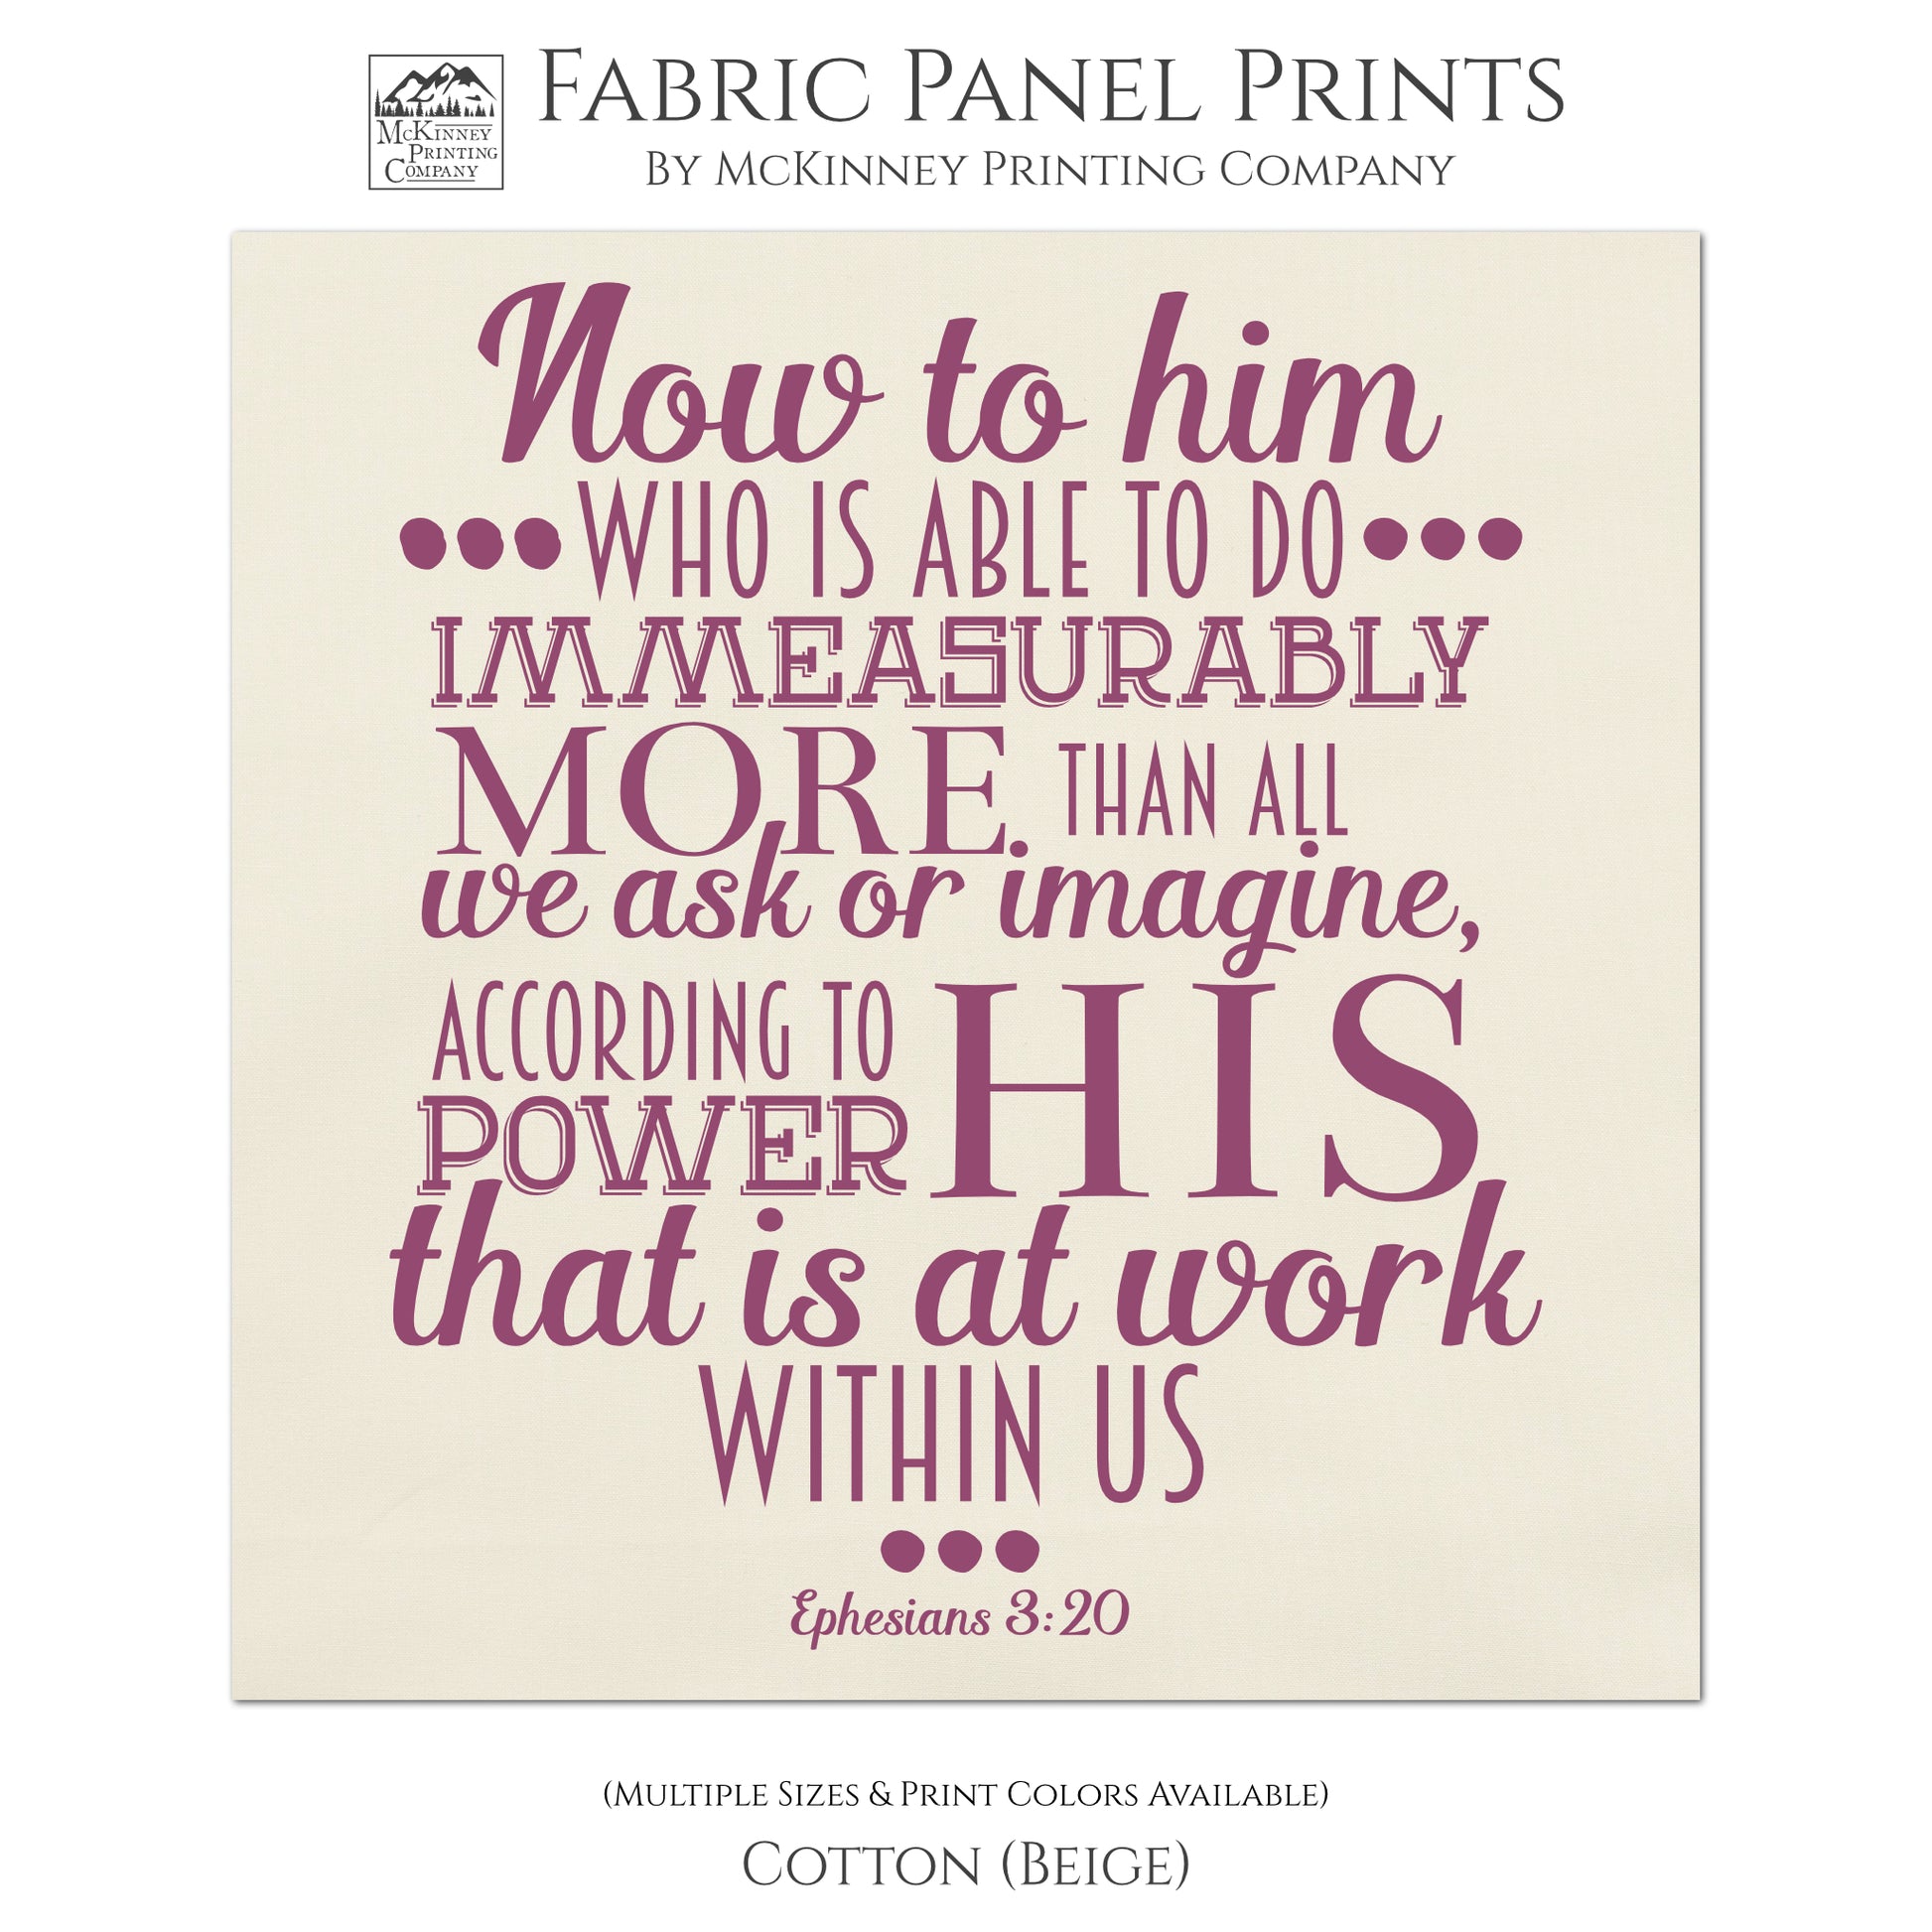 Now to him who is able to do immeasurably more than all we ask or imagine according to His power that is at work within us. - Ephesians 3 20 - Religious Fabric, Scripture Fabric, Quilting, Quilt Block, Sewing, Pillow, Wall Art - Cotton